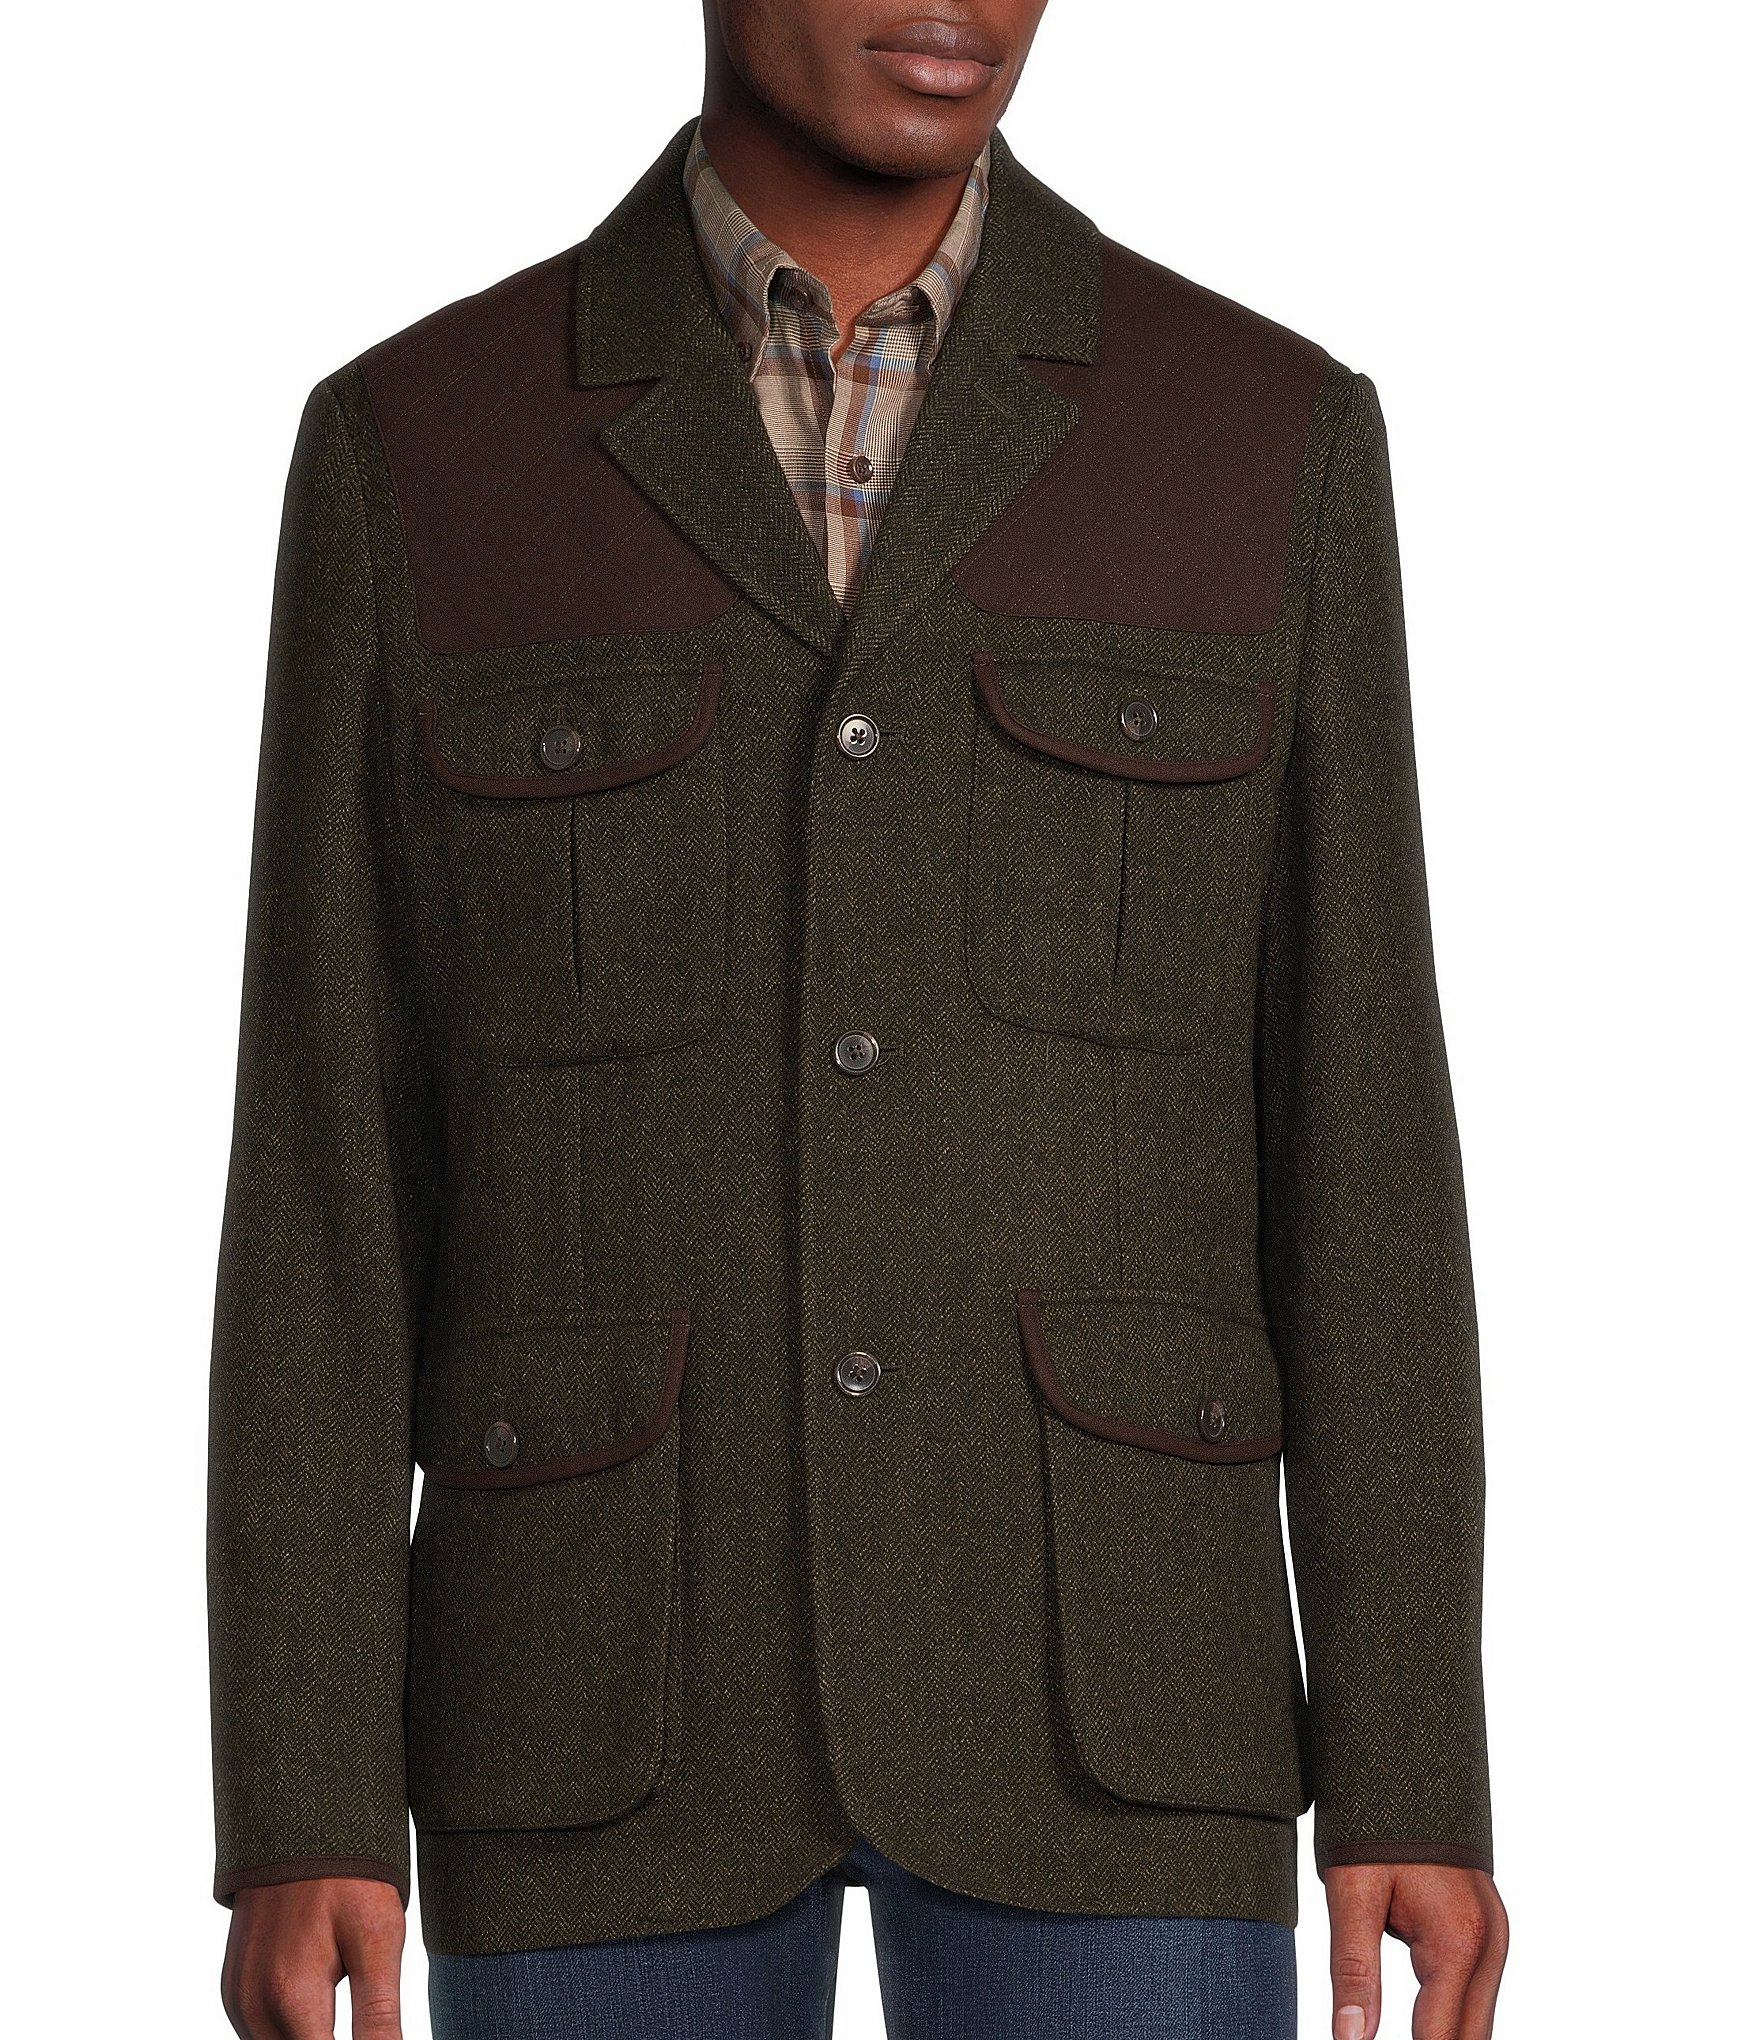 Cremieux Blue Label The Gamekeeper Collection Wool Hunting Blazer ...